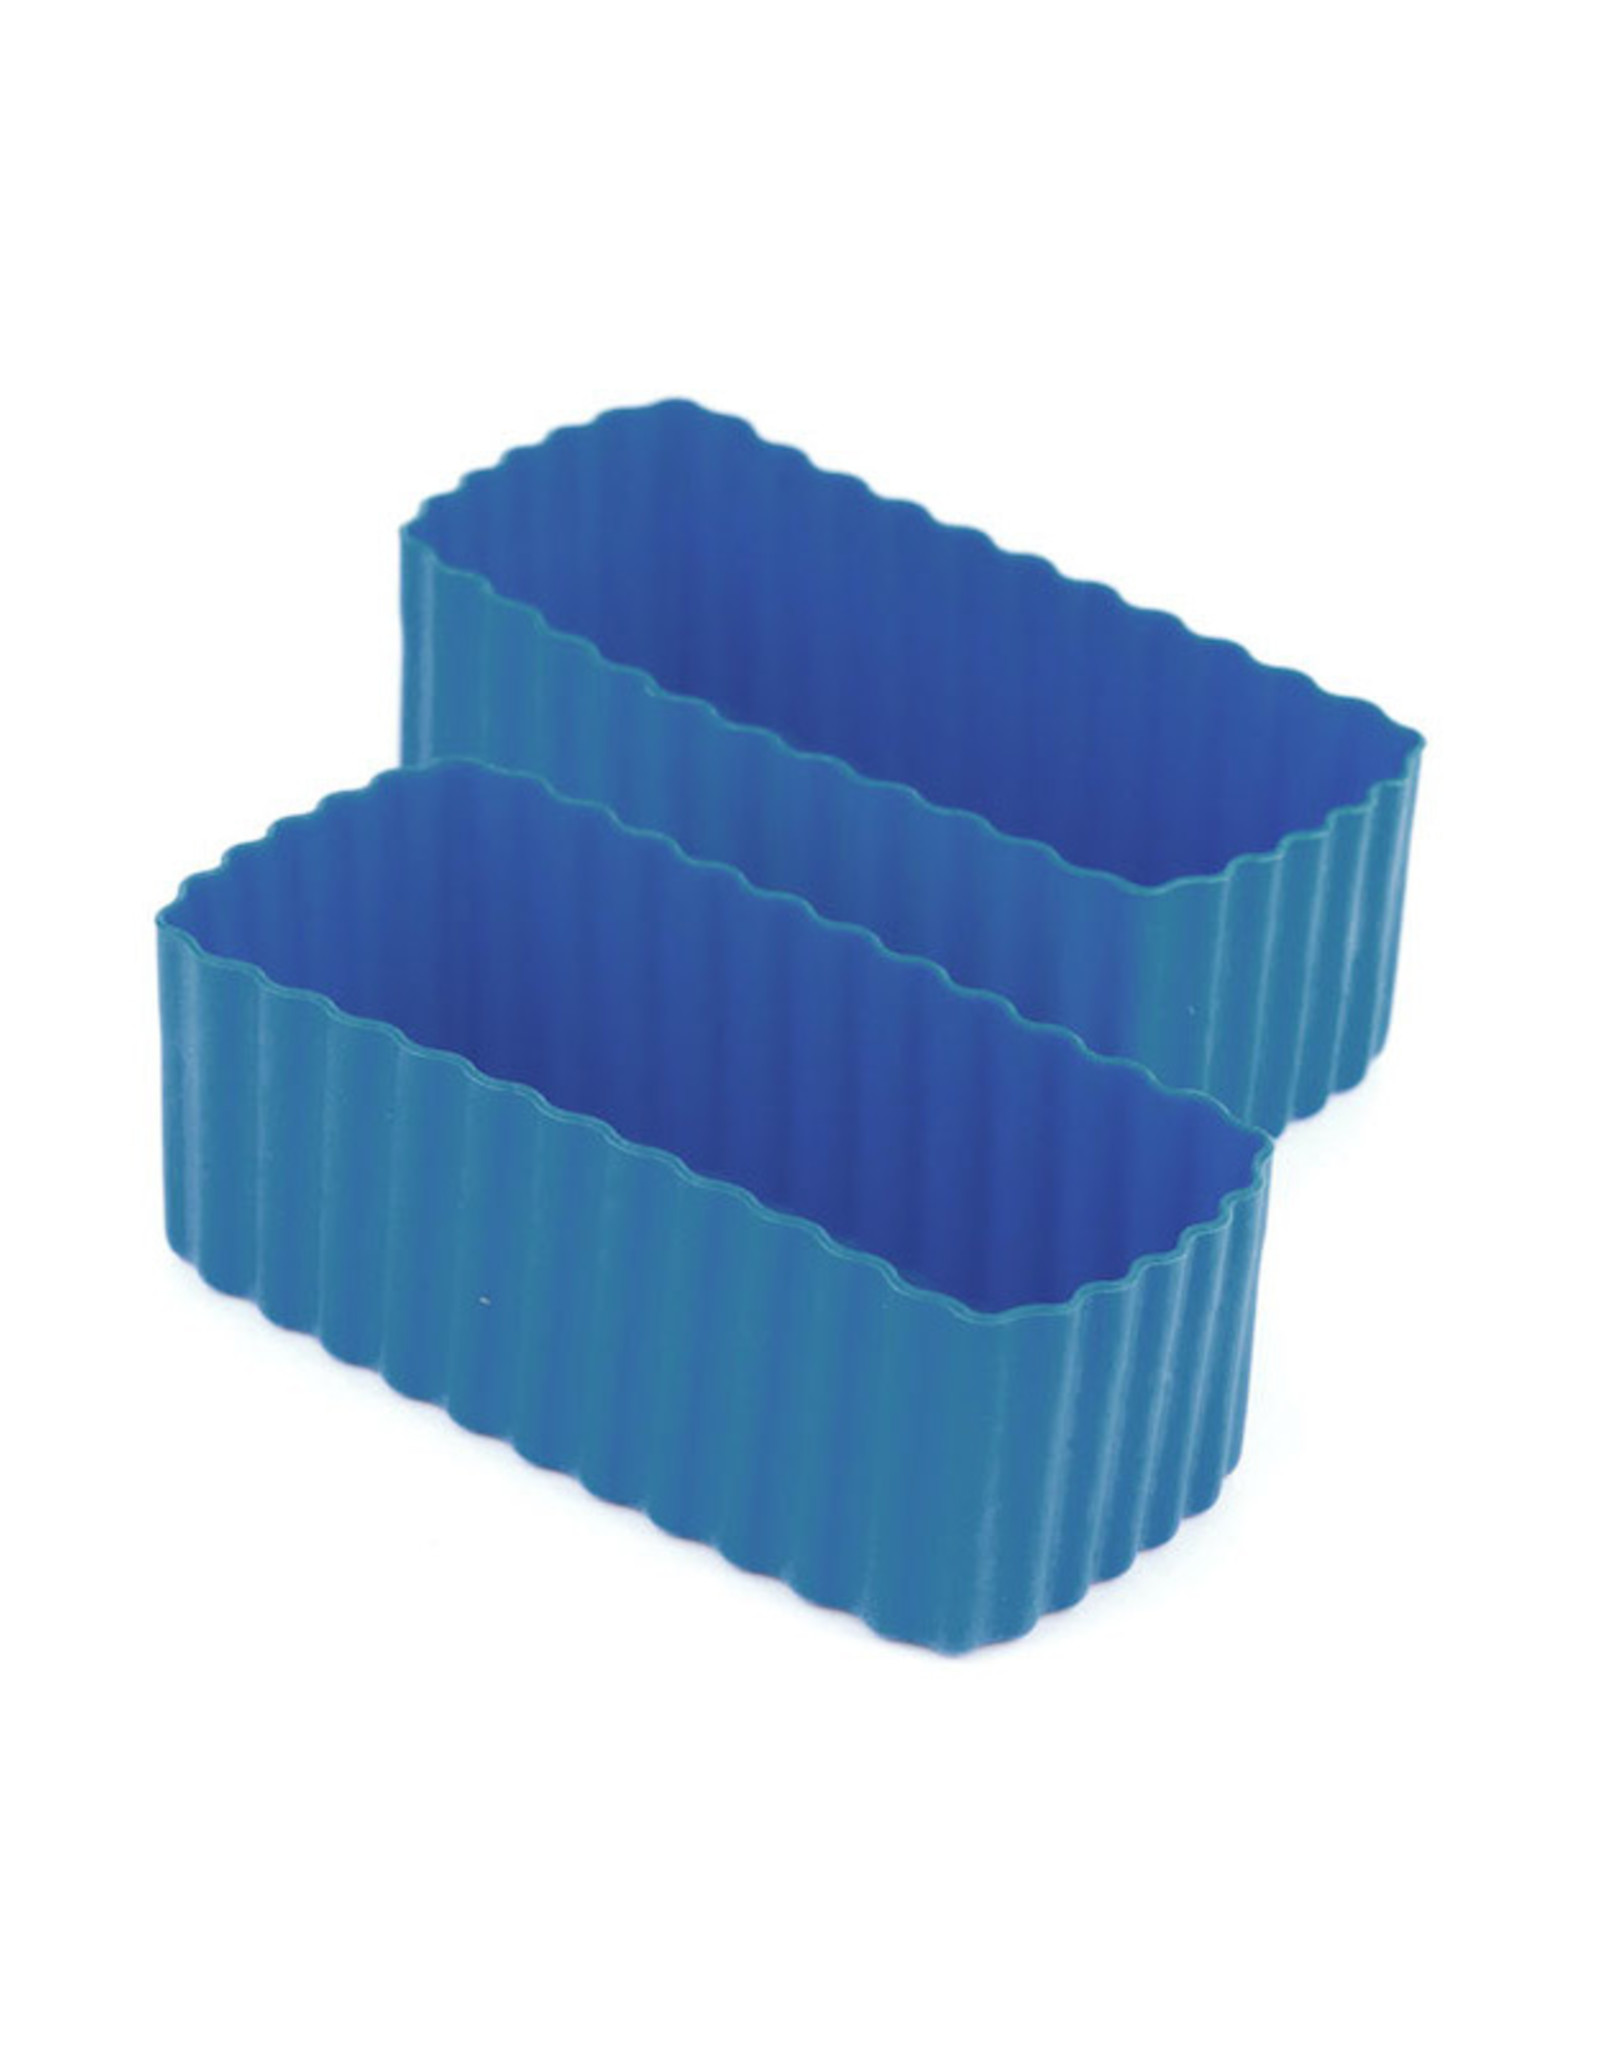 Little Lunch Box Co Little Lunch Box Silicone Bento Cups - Rechthoek Set/2 Blauw